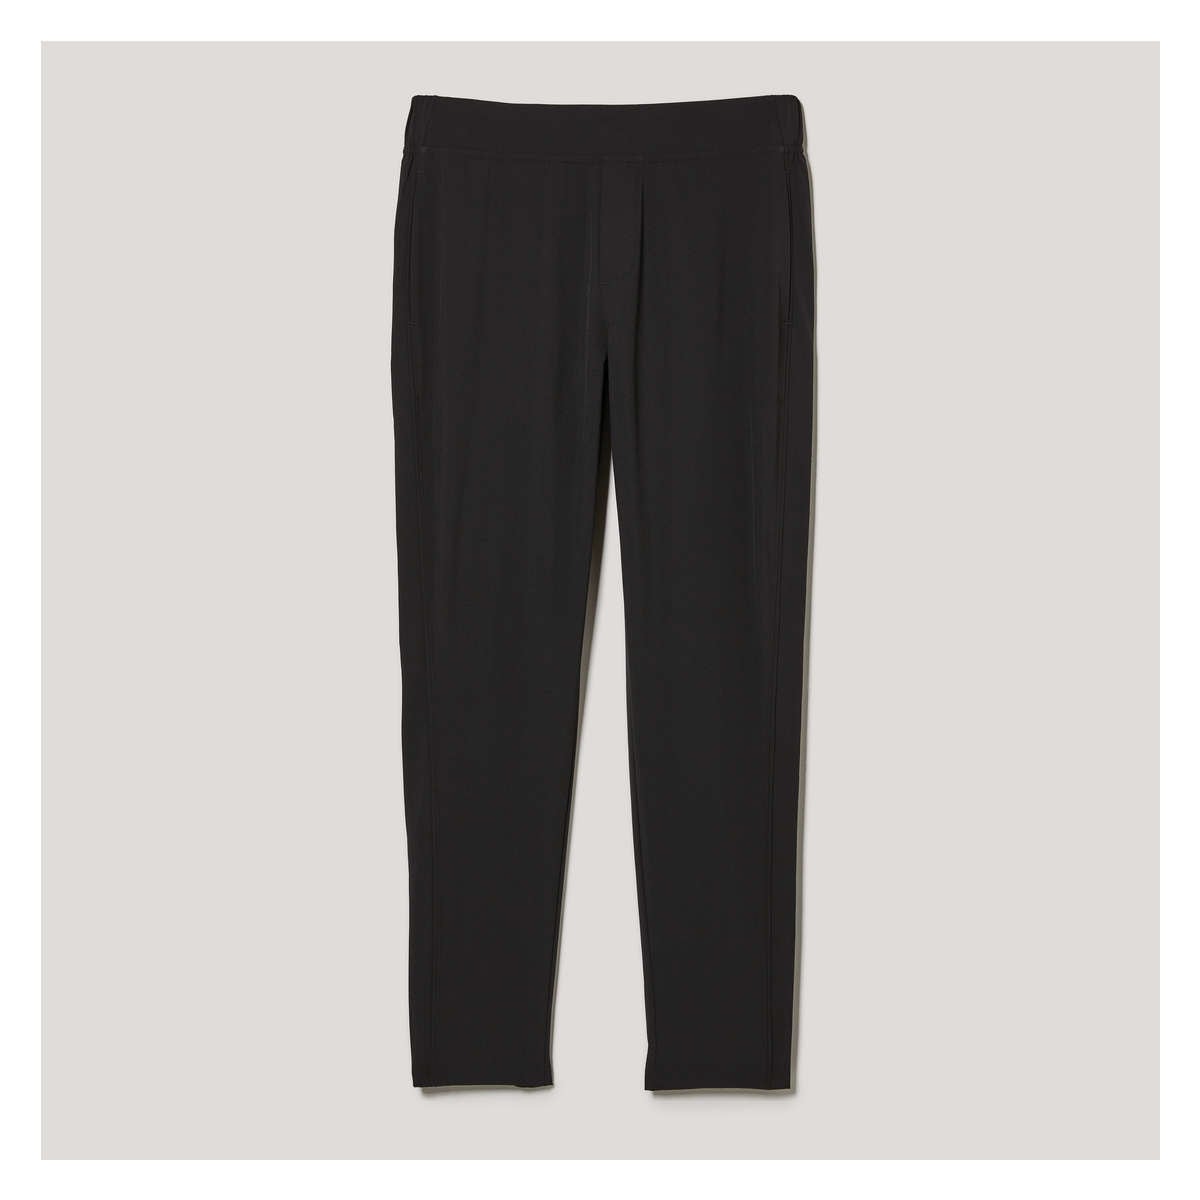 Active Golf Pant in Black from Joe Fresh